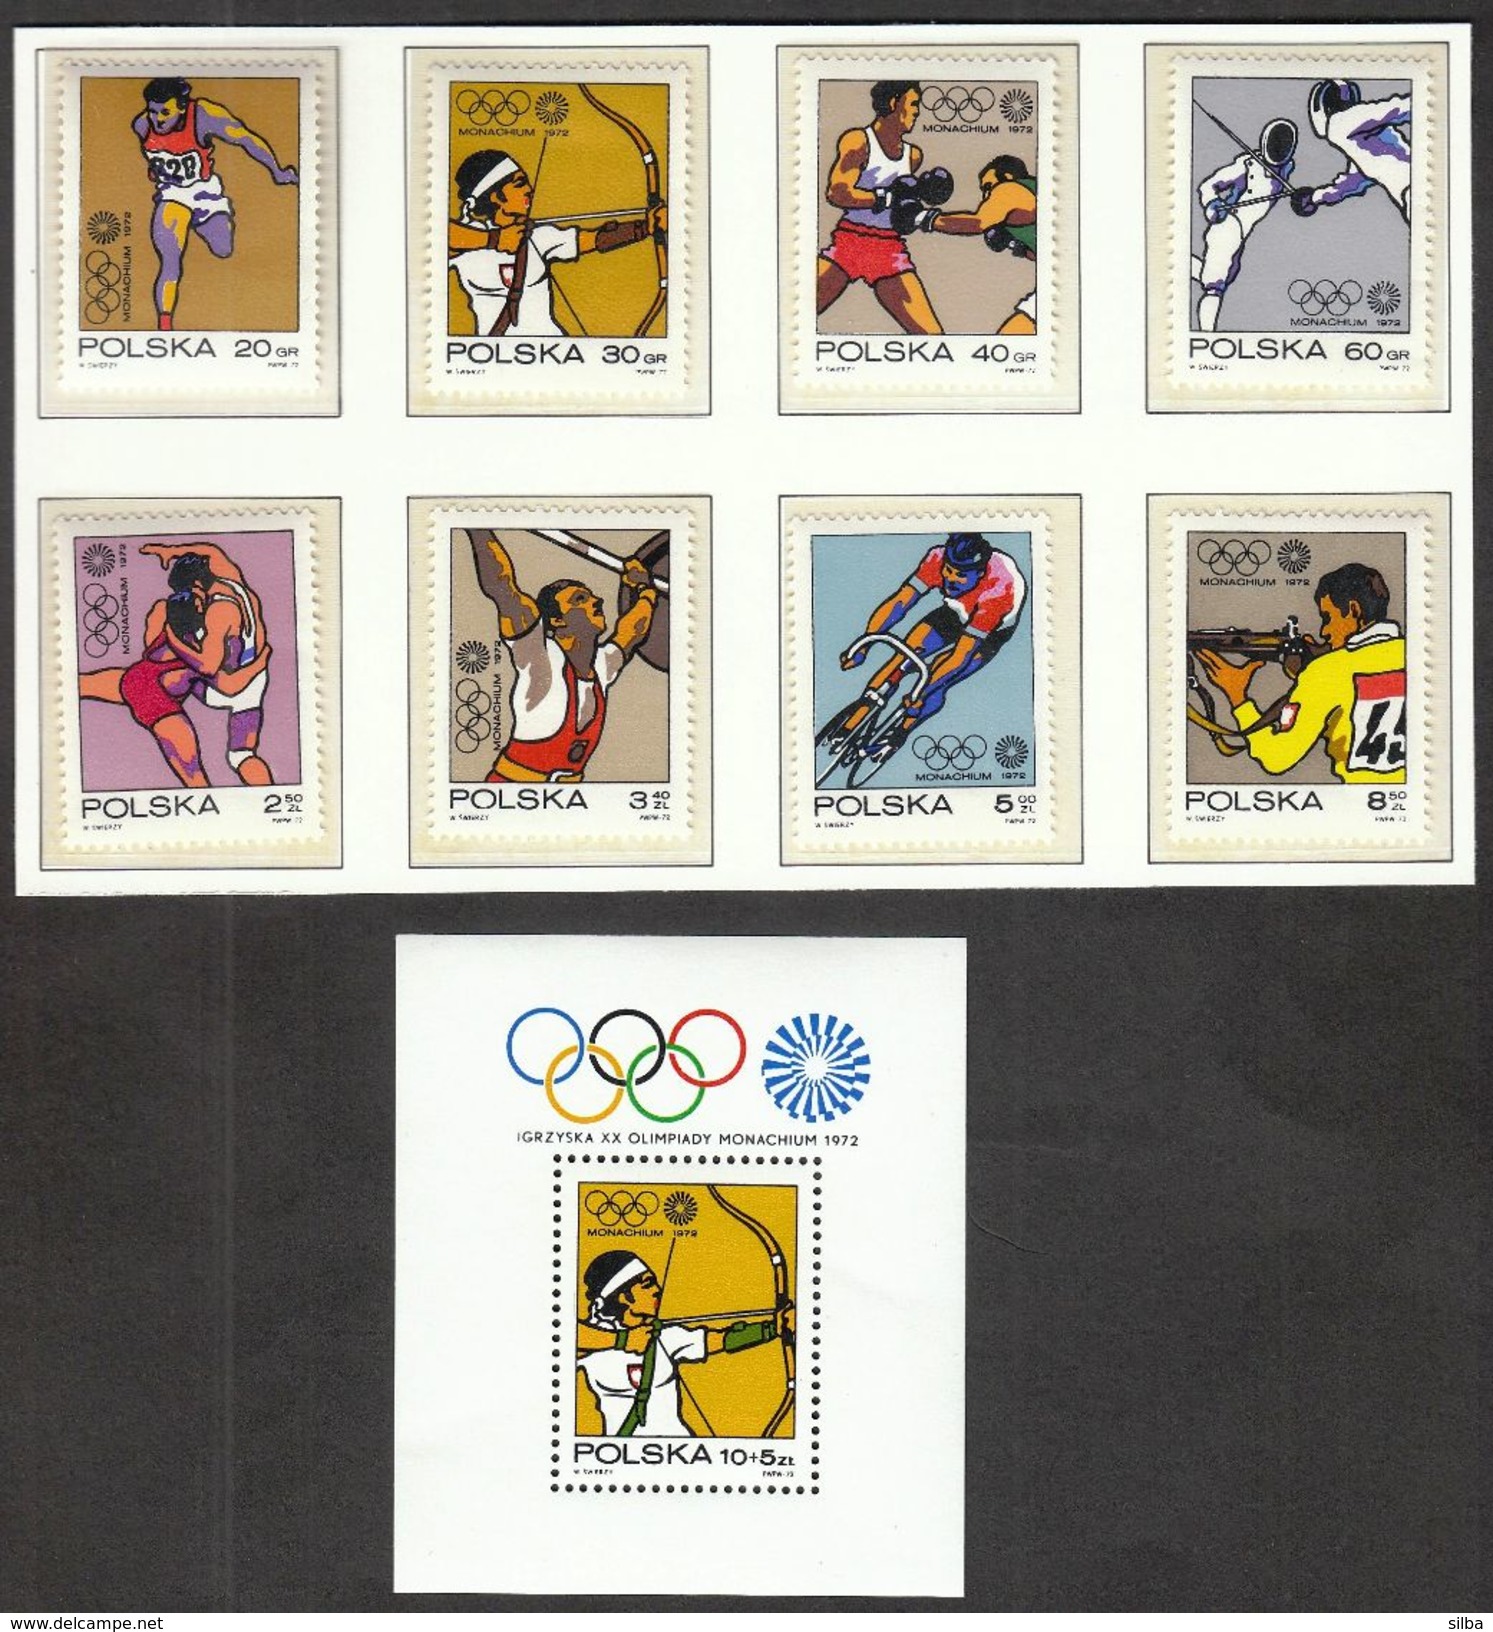 Poland 1972 / Olympic Games Munich / Athletics, Archery, Boxing, Fencing, Wrestling, Cycling, Shooting / PERFORATED - Summer 1972: Munich